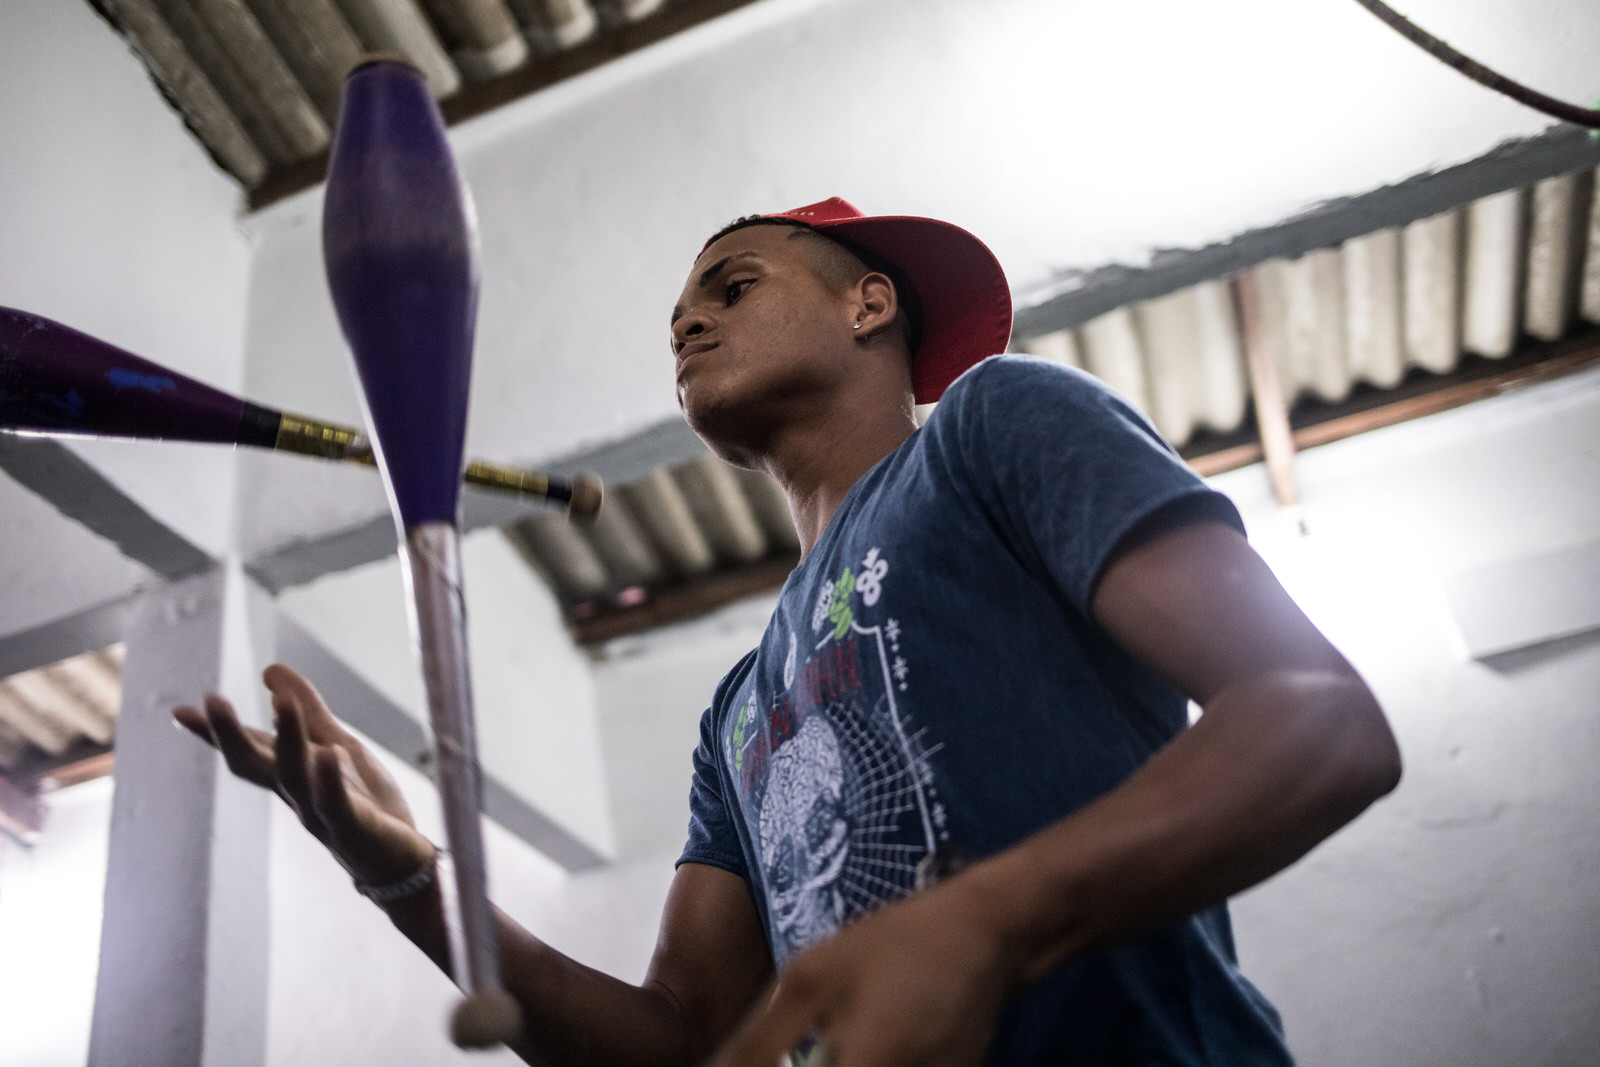  The centre teaches children and youth activities such as music, art, boxing, capoeira, juggling and dance as a way to encourage school attendance and keep young people away from engaging in street crime. 